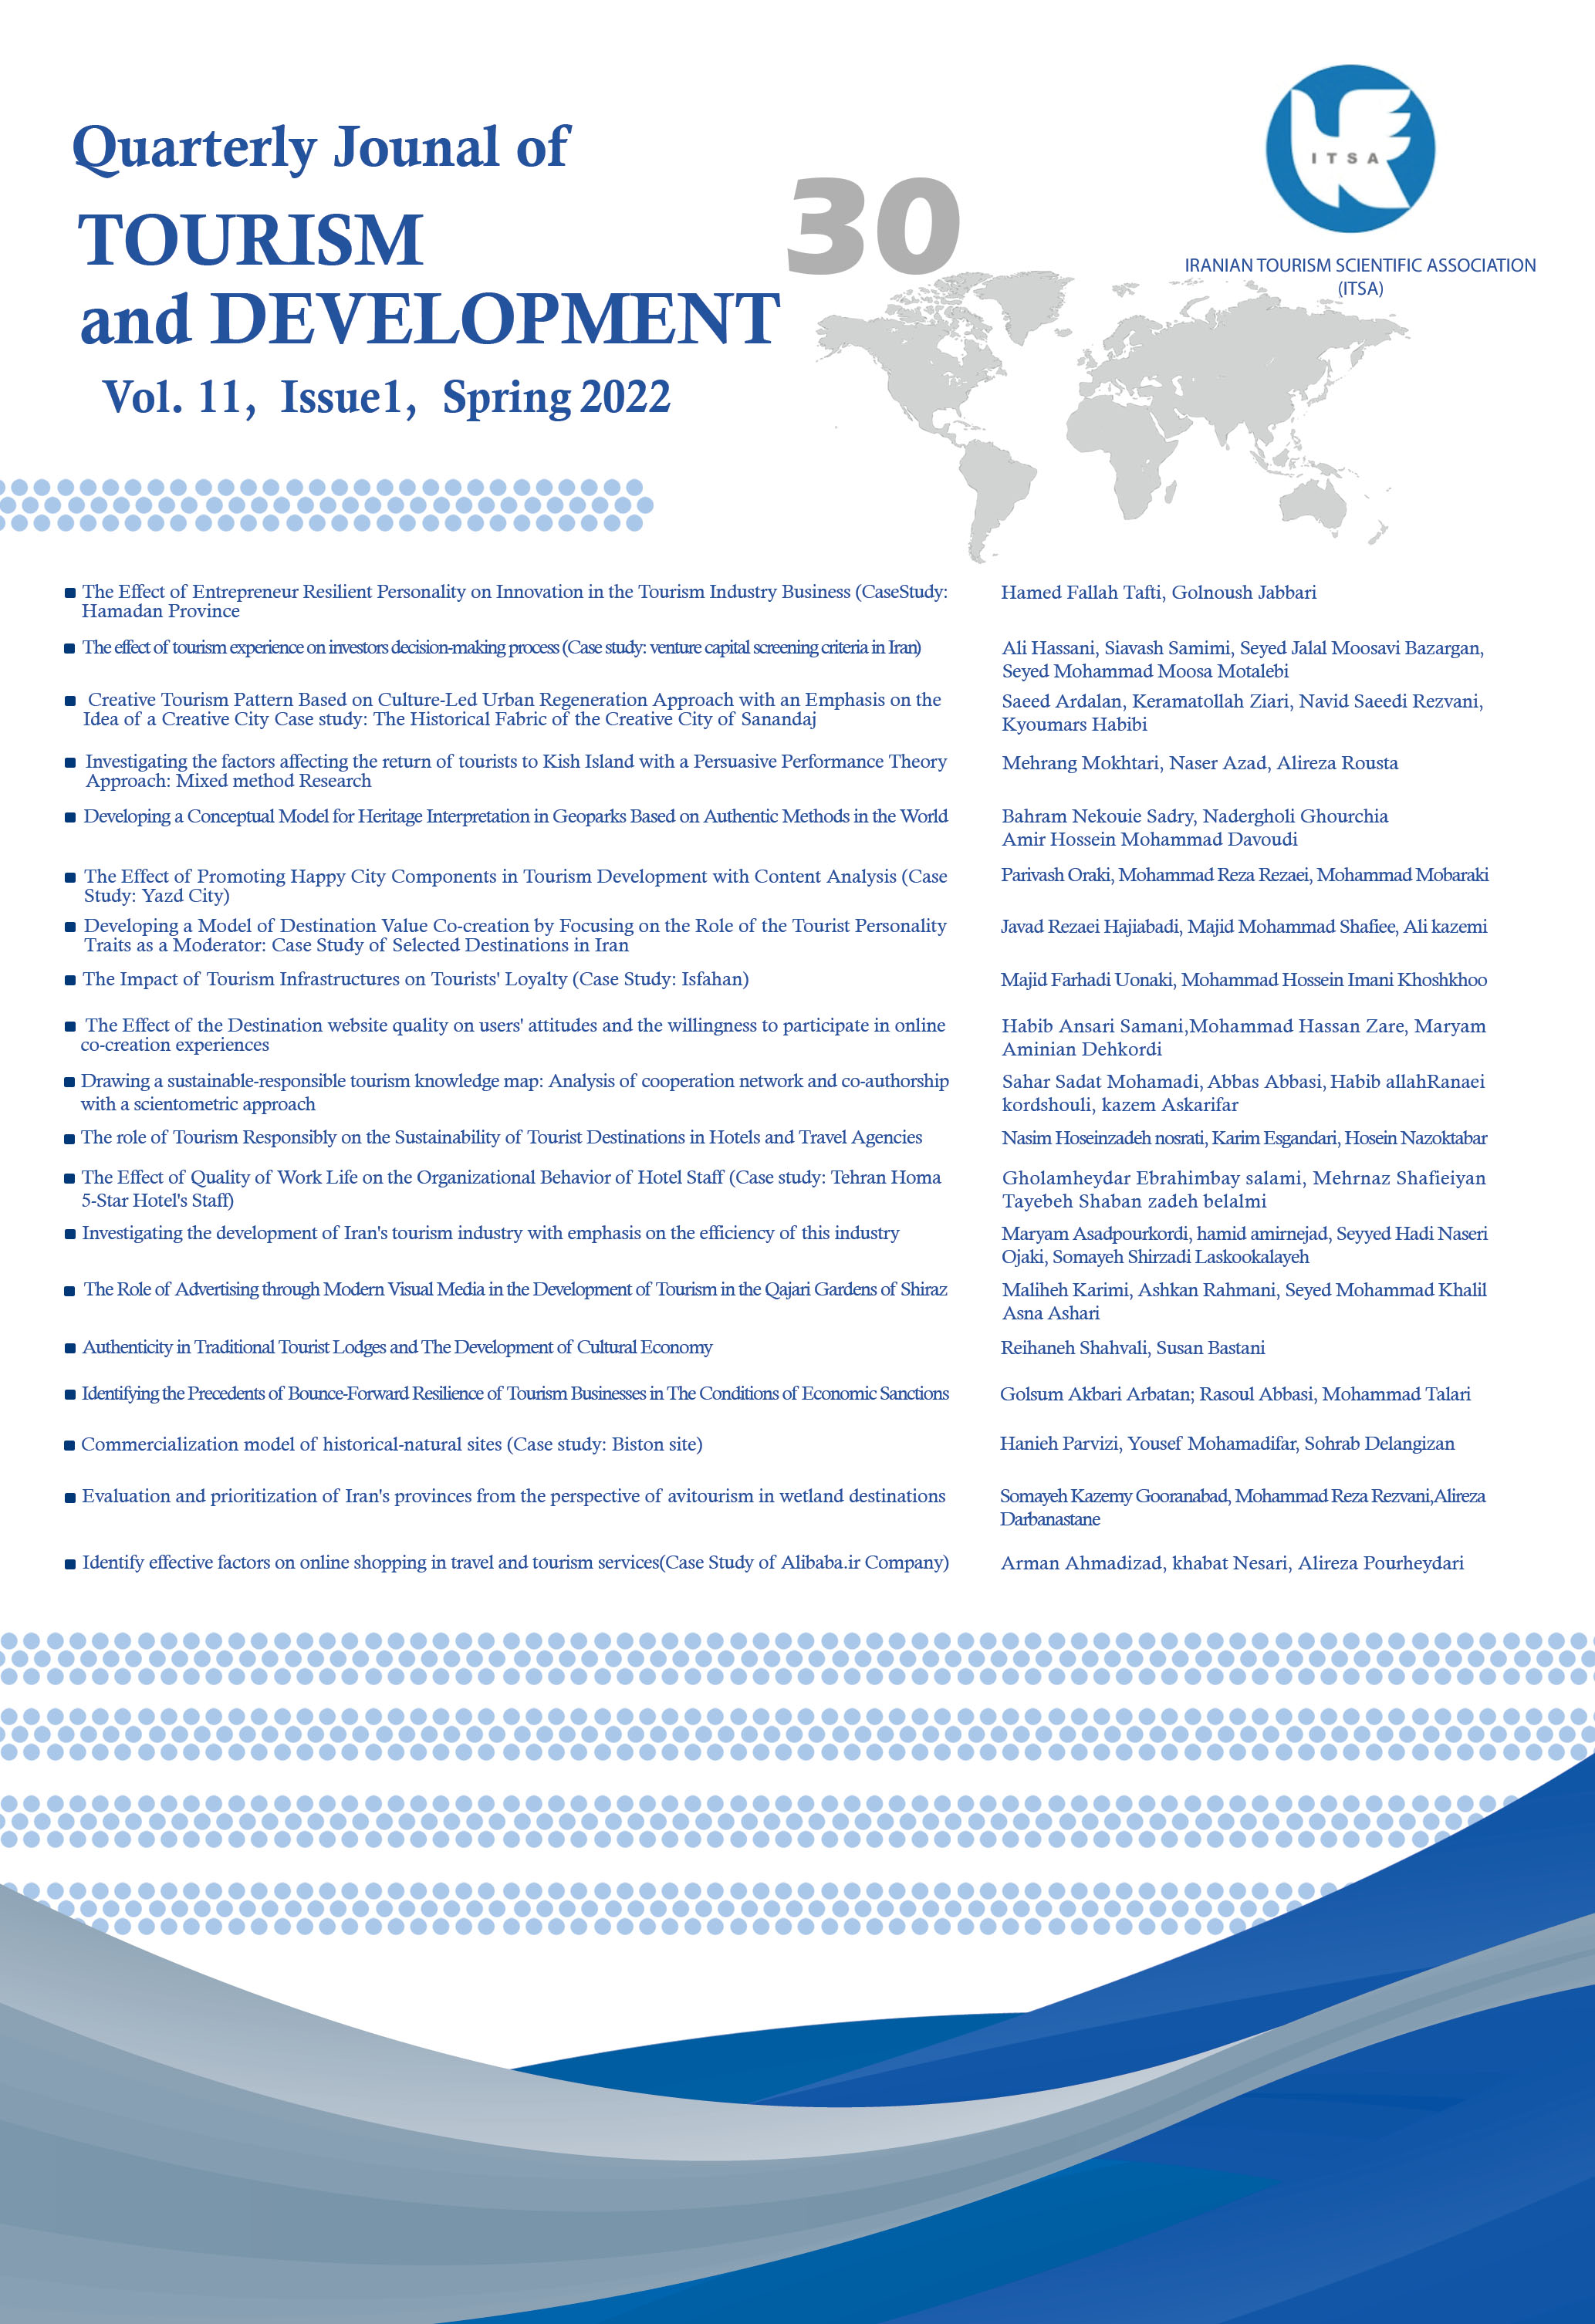 Journal of Tourism and Development